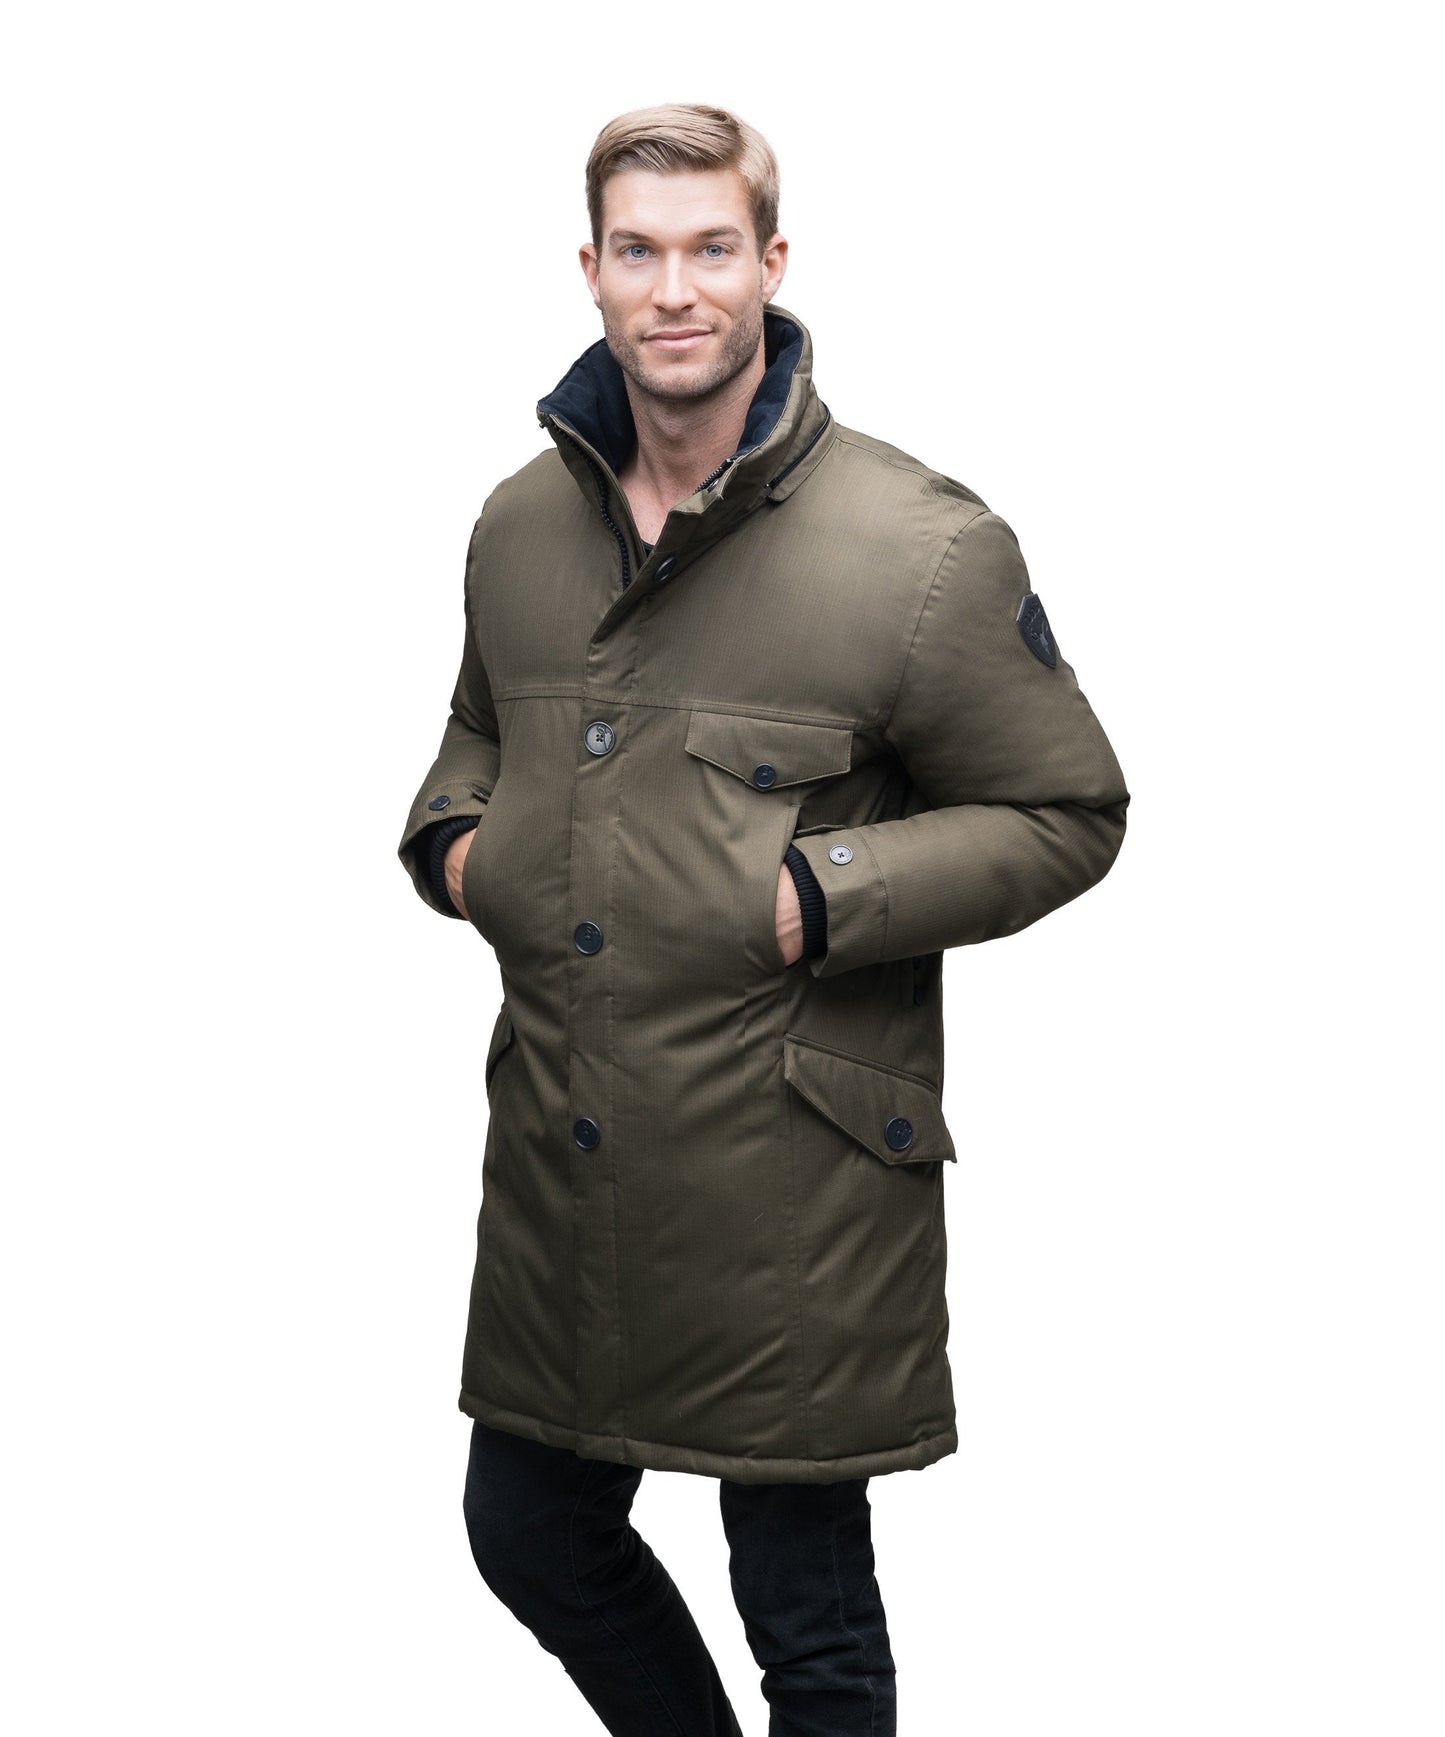 Knee length men's down parks with zipper closure and button up placket with a small left chest pocket in CH Army Green